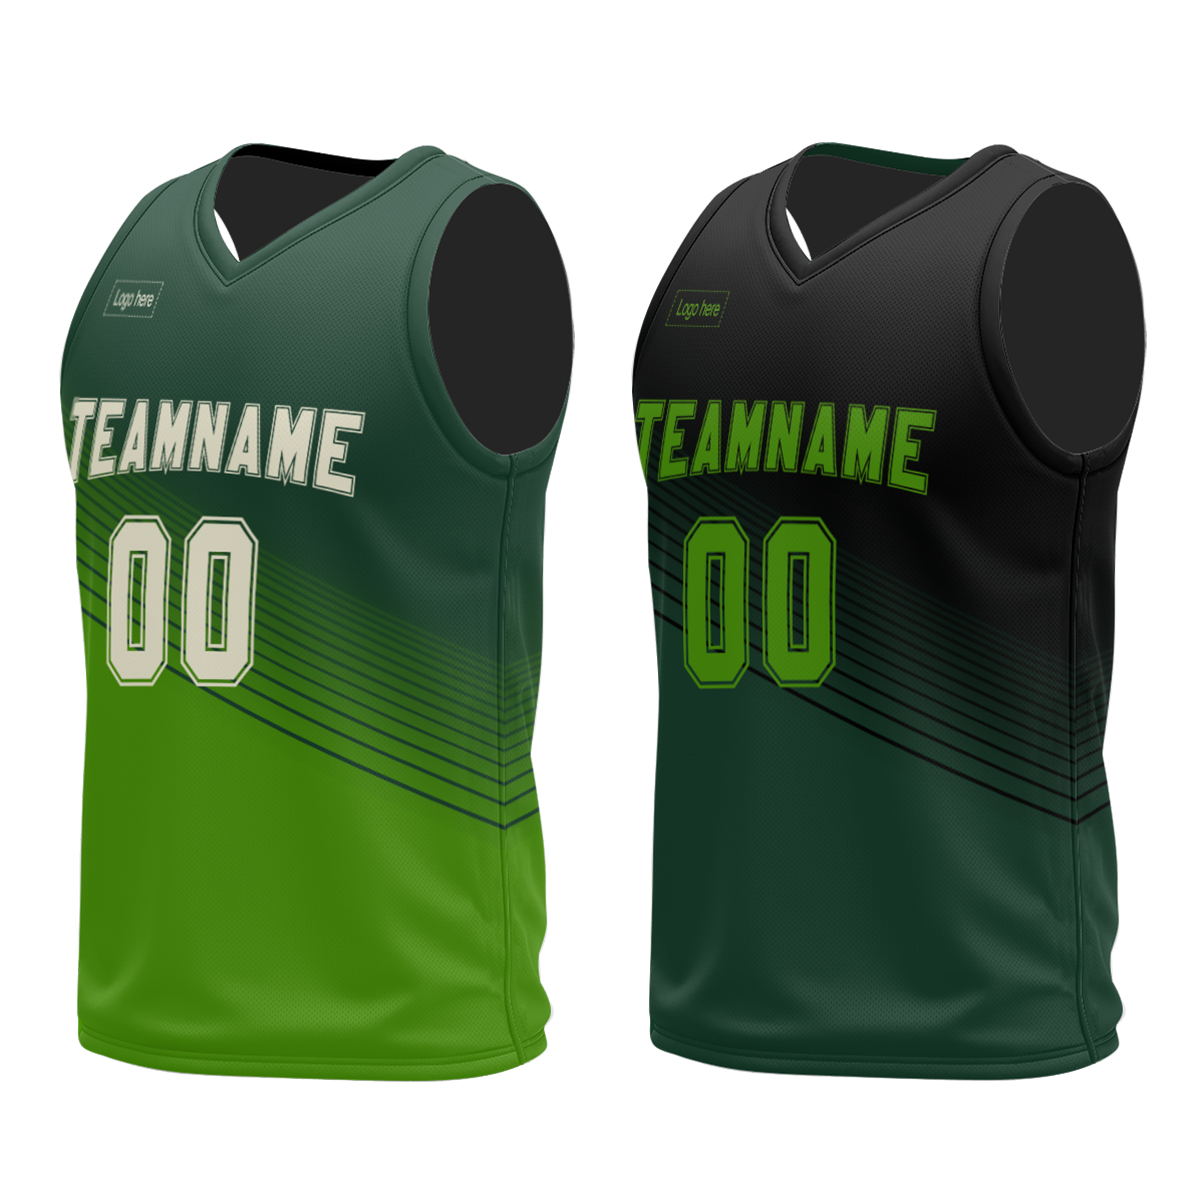 cheap-custom-reversible-basketball-jerseys-sublimation-with-numbers-team-design-print-blank-basketball-uniforms-at-cj-pod-5